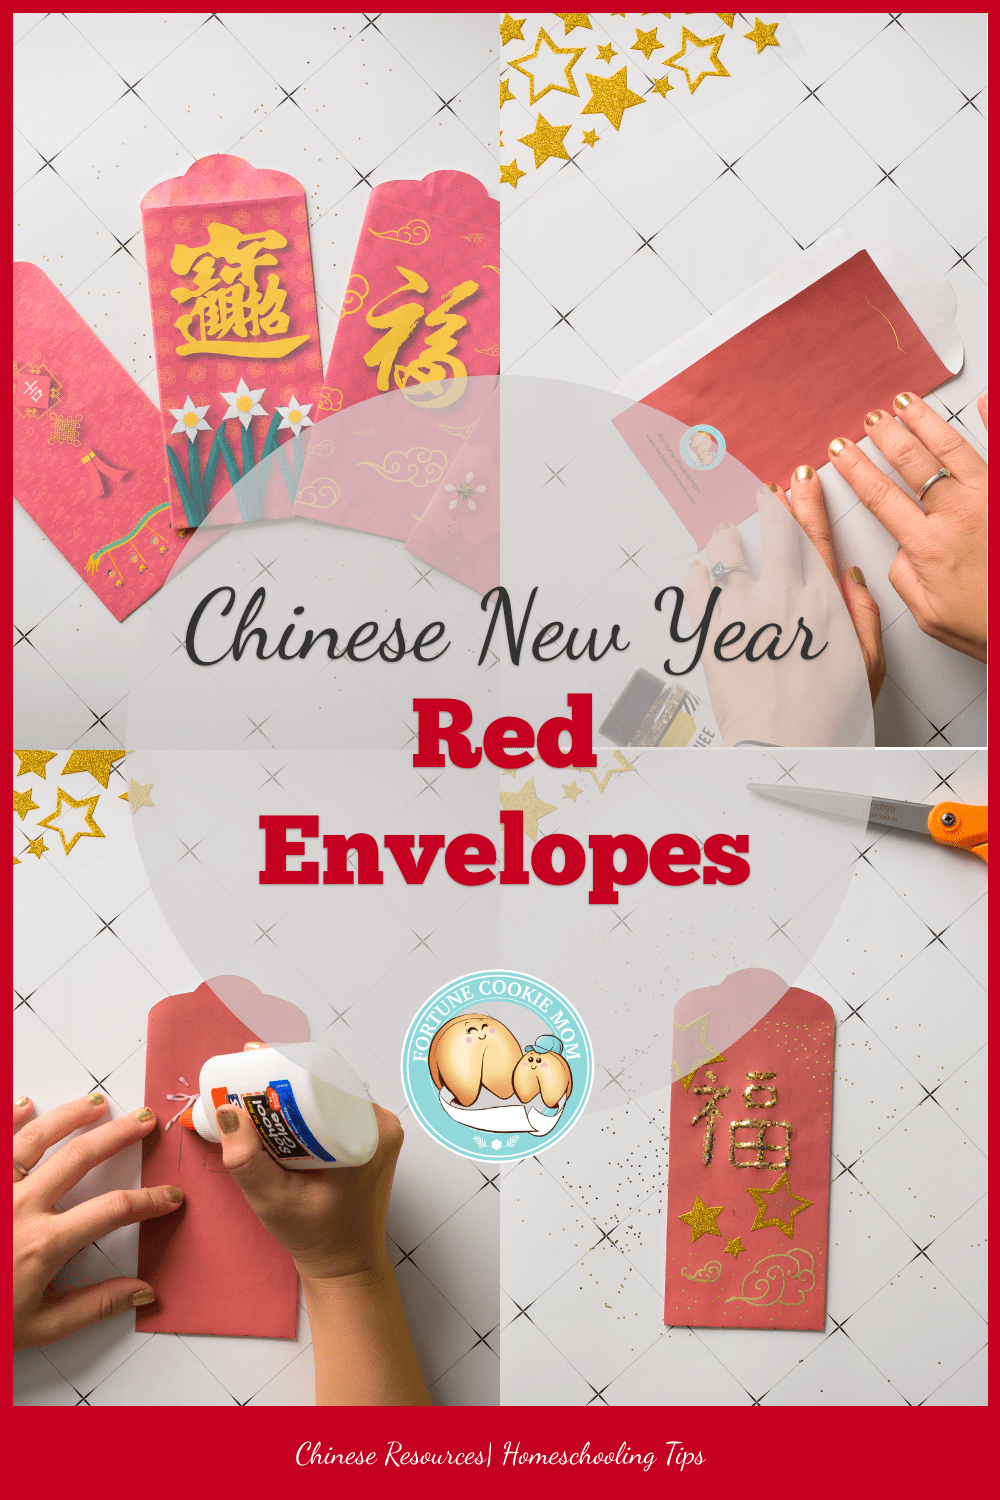 DIY Chinese New Year Red Envelopes like a Pro - Fortune Cookie Mom